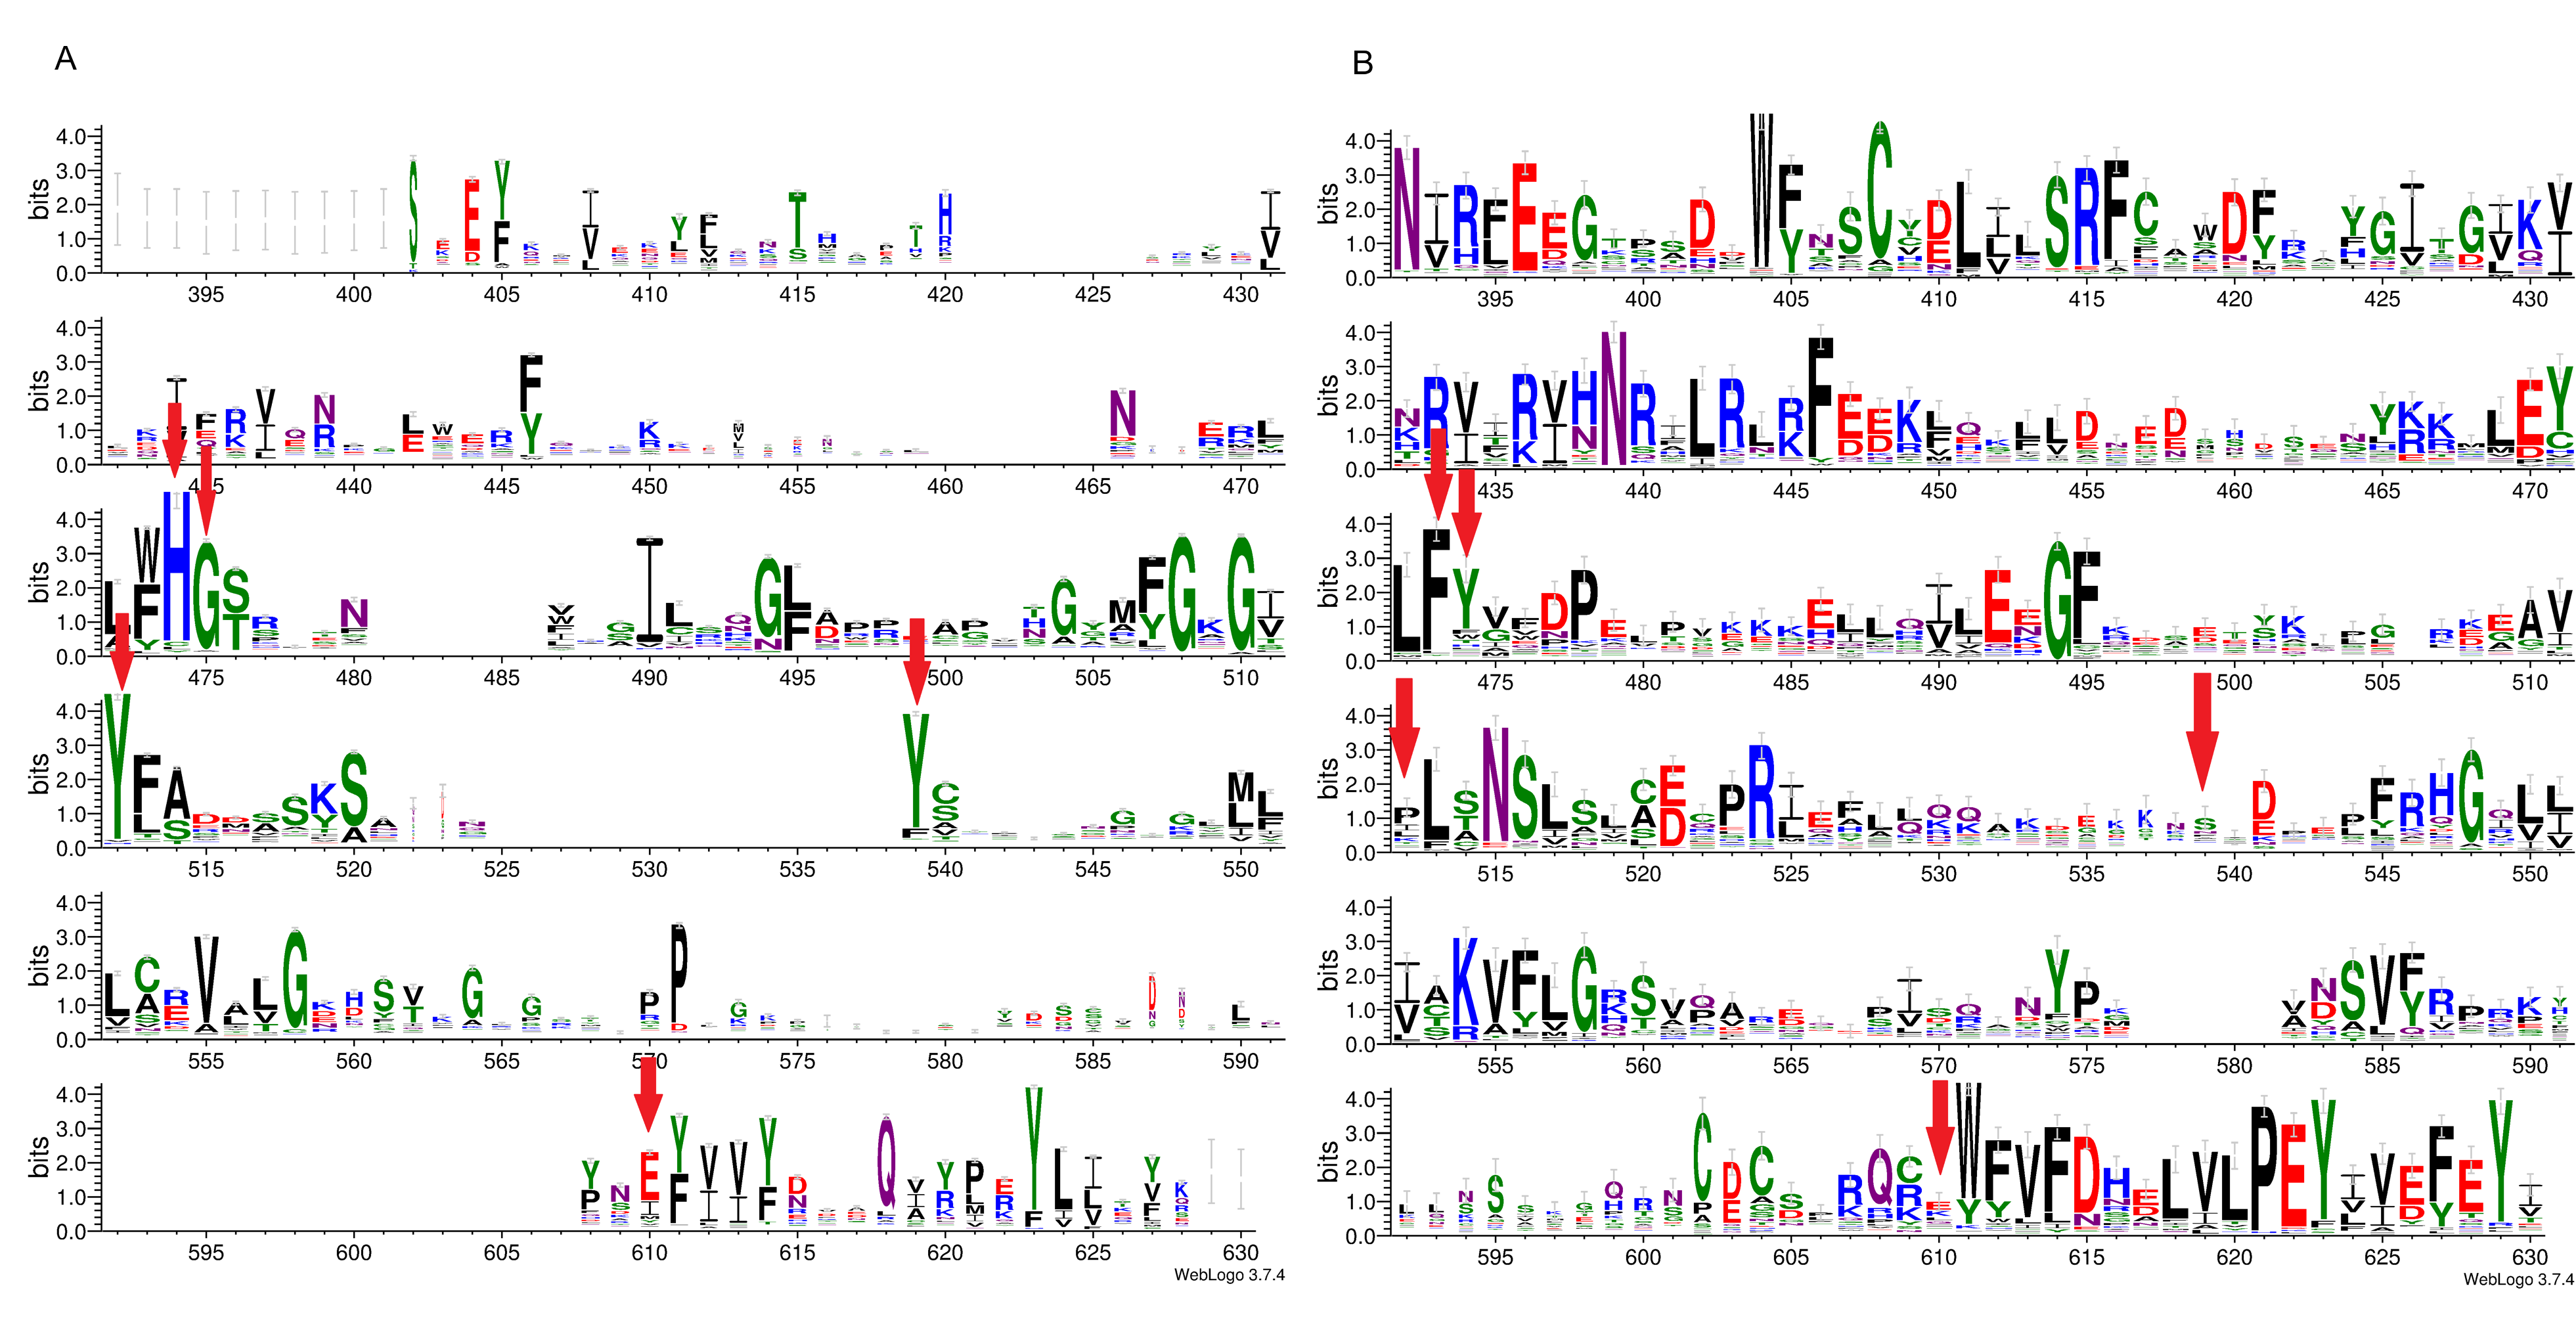 A novel predicted ADP-ribosyltransferase-like family conserved in ...